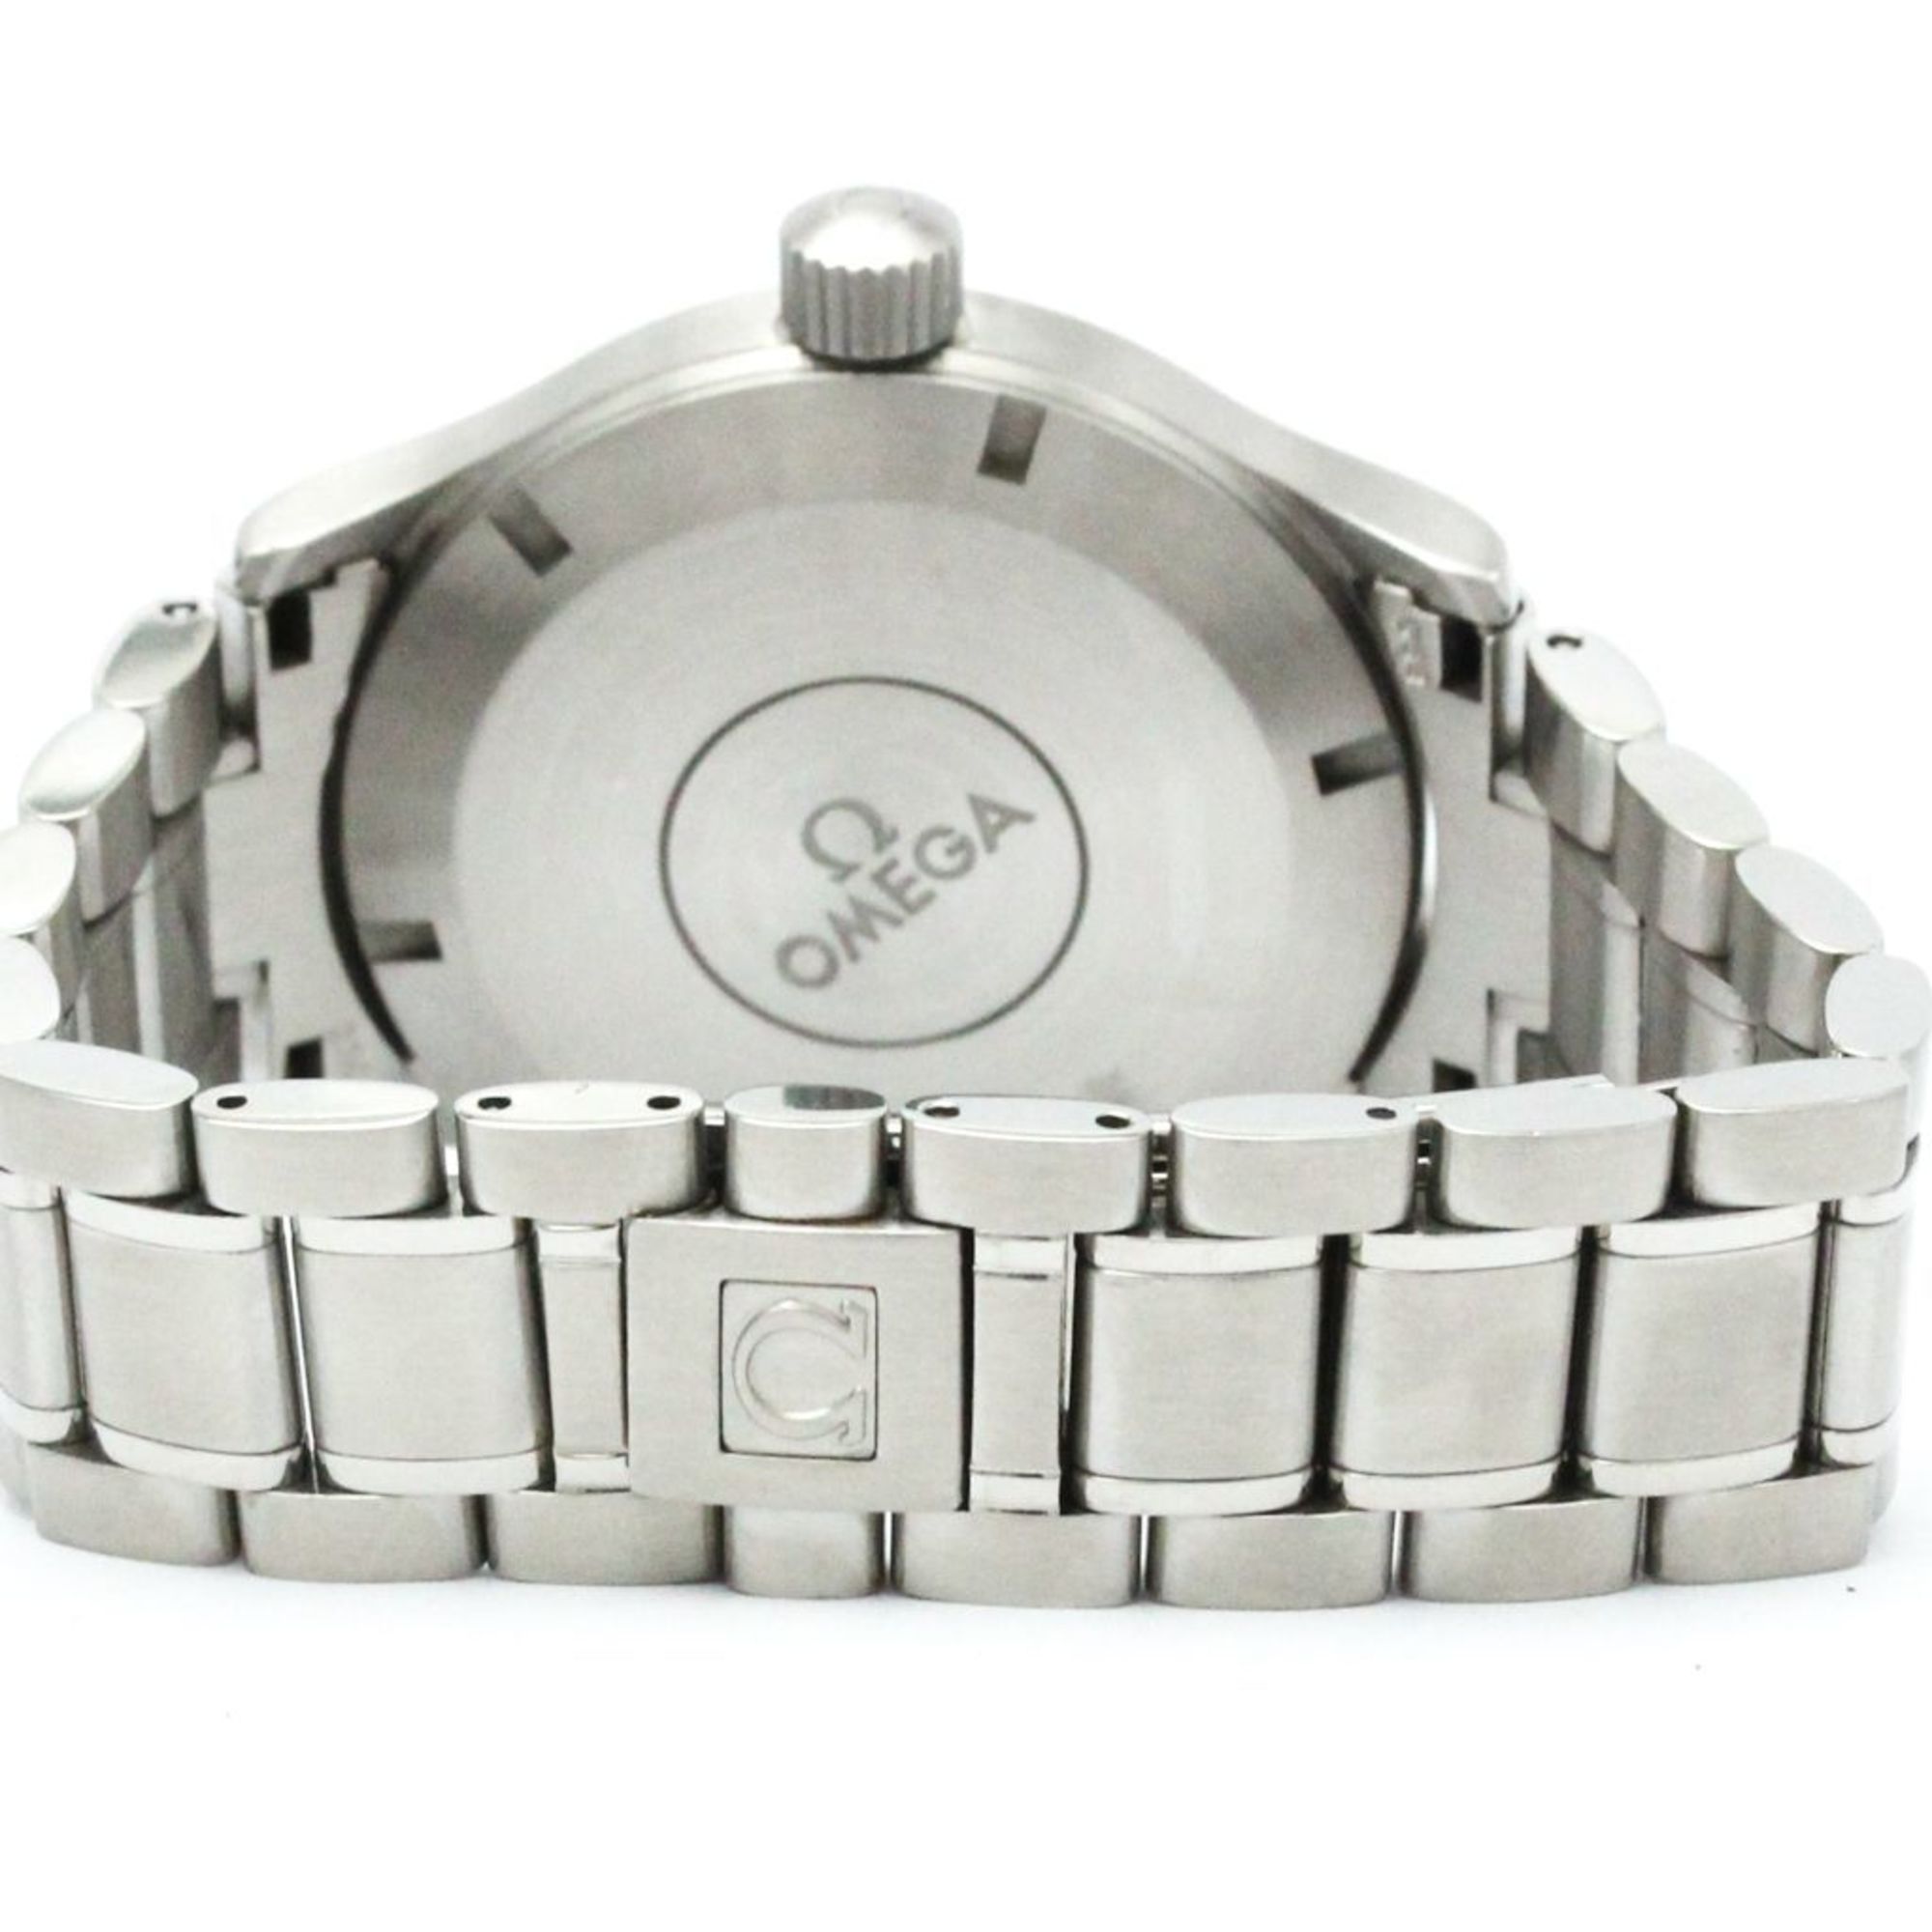 Polished OMEGA Classic Stainless Steel Automatic Mens Watch 5203.50 BF572565